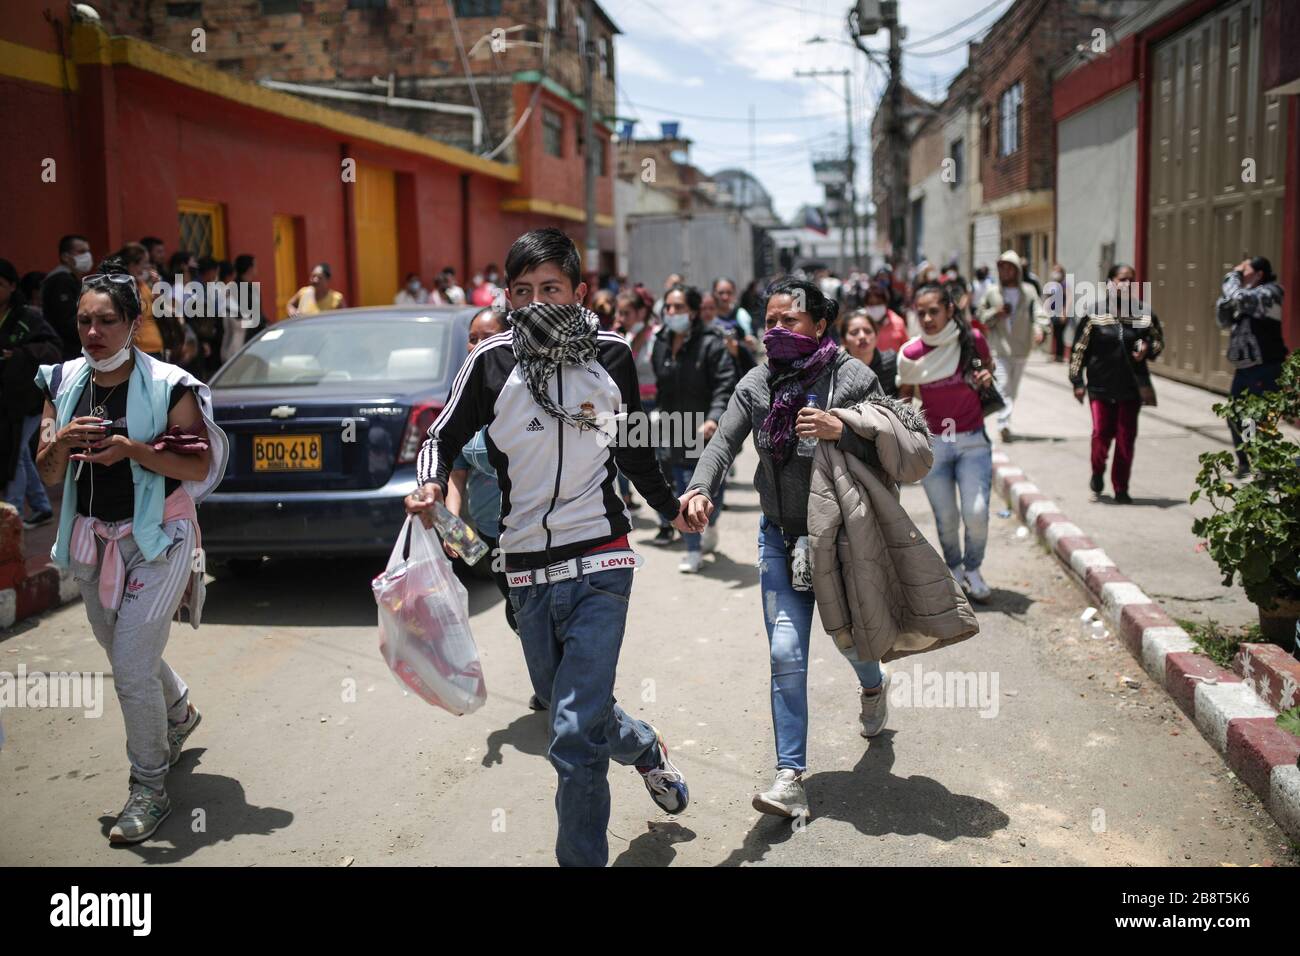 Bogota, Colombia. 22nd Mar, 2020. Families of prisoners head for the prison where an attempted prison break happened in Bogota, Colombia, March 22, 2020. An attempted prison break in Colombia's capital Bogota left 23 inmates dead and 83 others injured, of whom 32 are hospitalized, Justice Minister Margarita Cabello said on Sunday. Seven prison guards and officials belonging to the National Penitentiary and Prison Institute (INPEC) were also injured, two of them critically, said Cabello. Credit: Jhon Paz/Xinhua/Alamy Live News Stock Photo